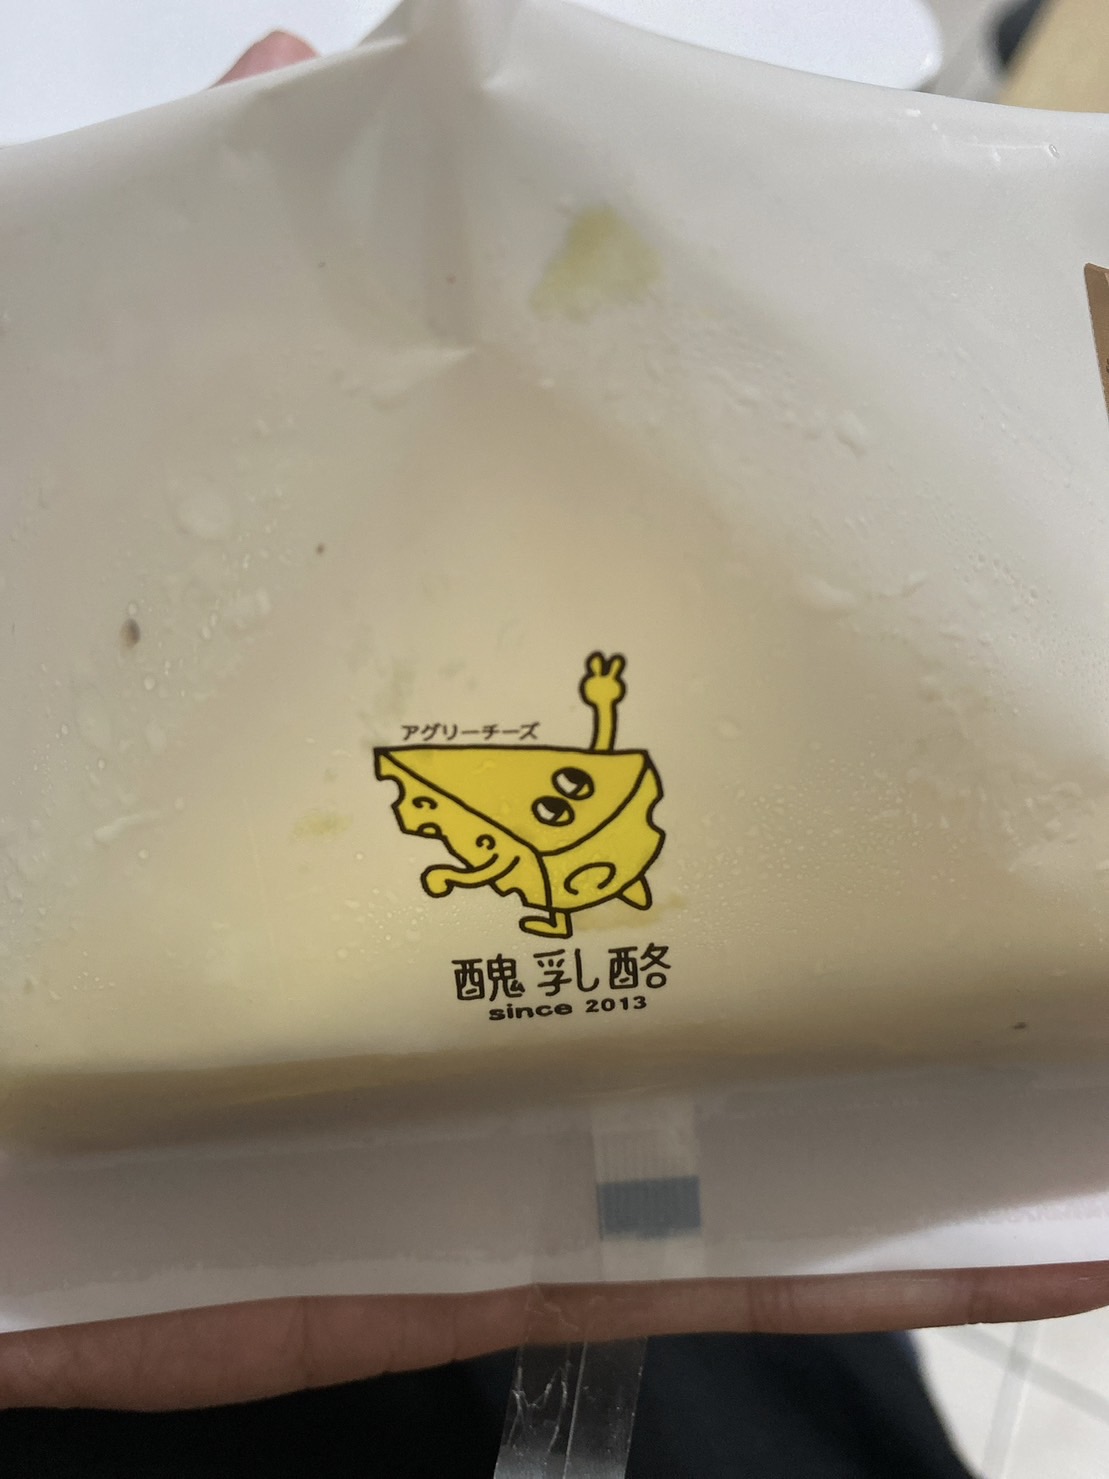 Ugly cheese 醜乳酪